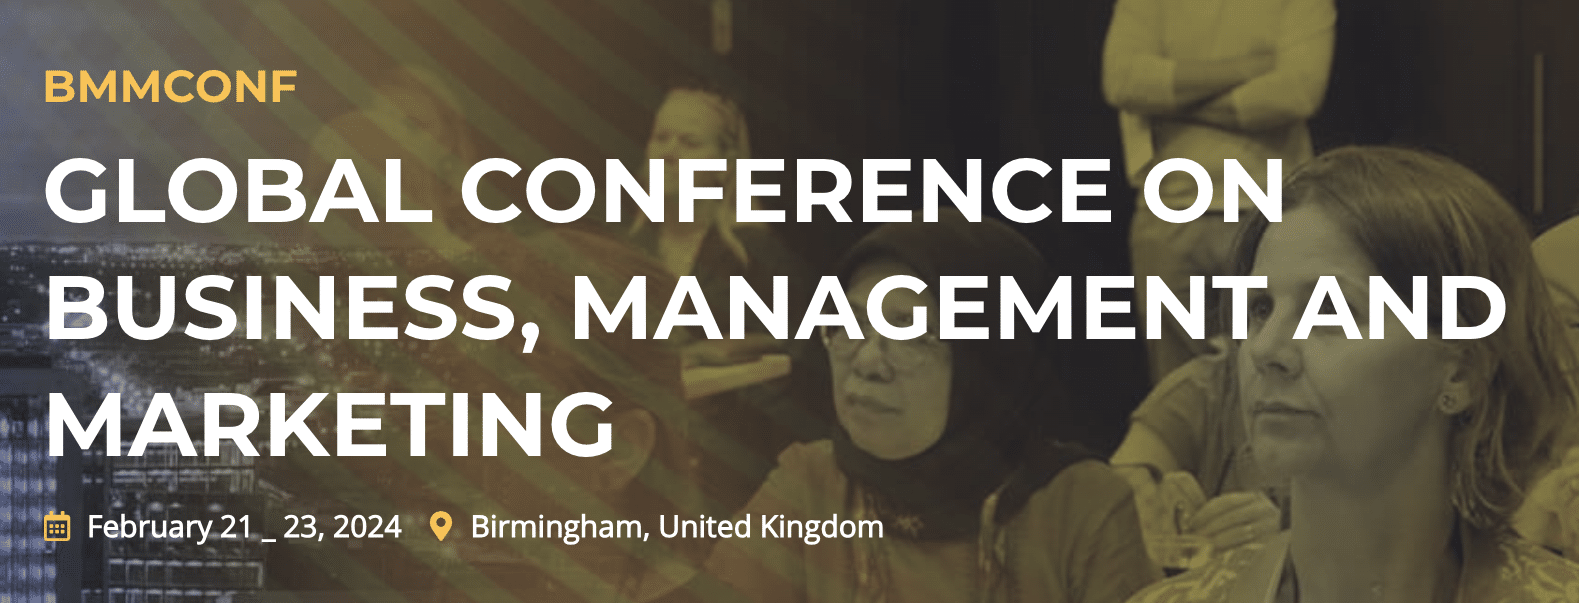 Global Conference on Business, Management and Marketing (BMMCONF)